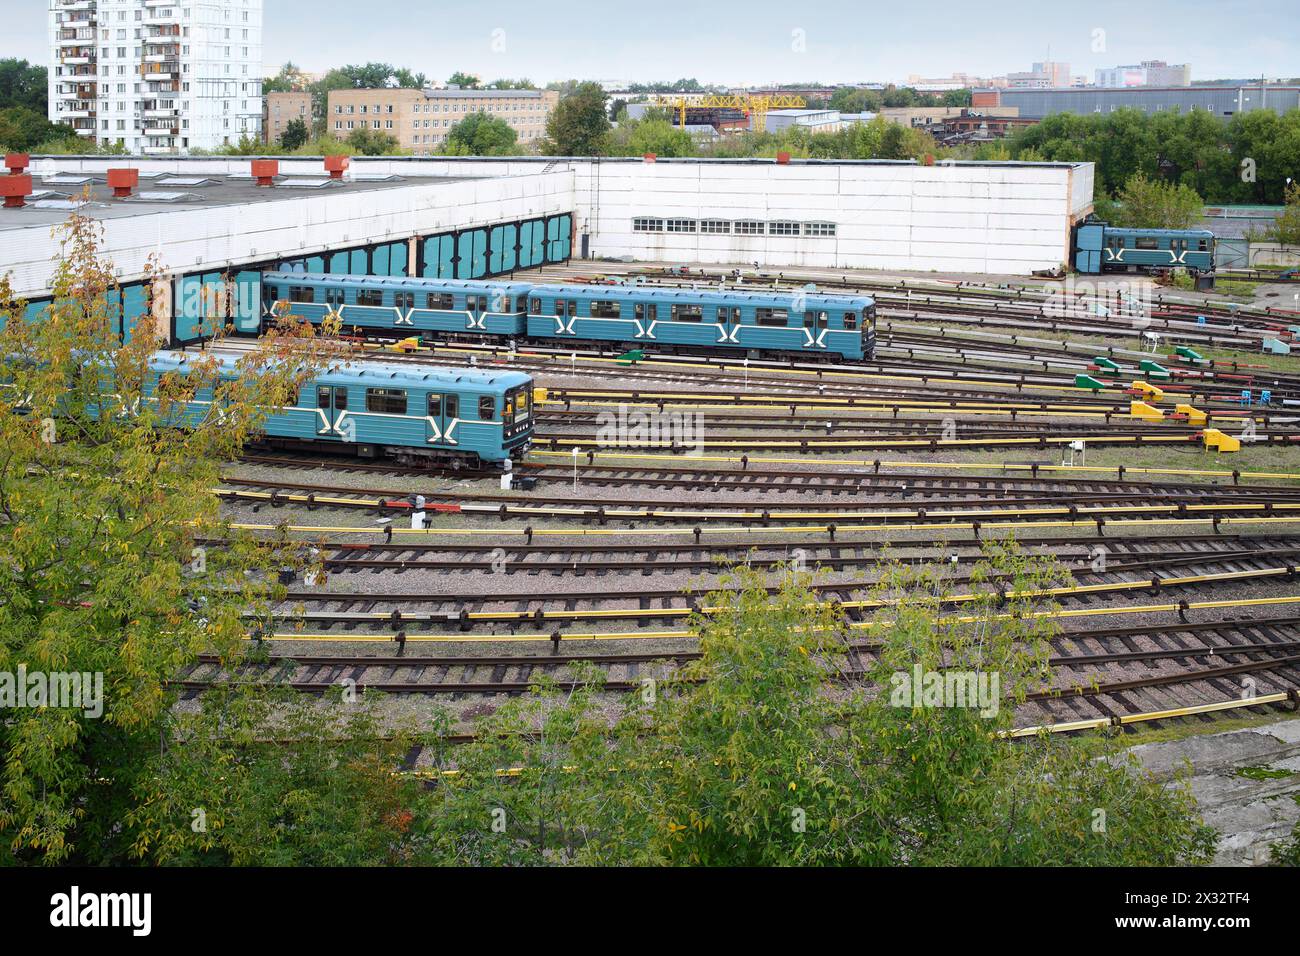 Two city underground trains leave the depot gates Stock Photo